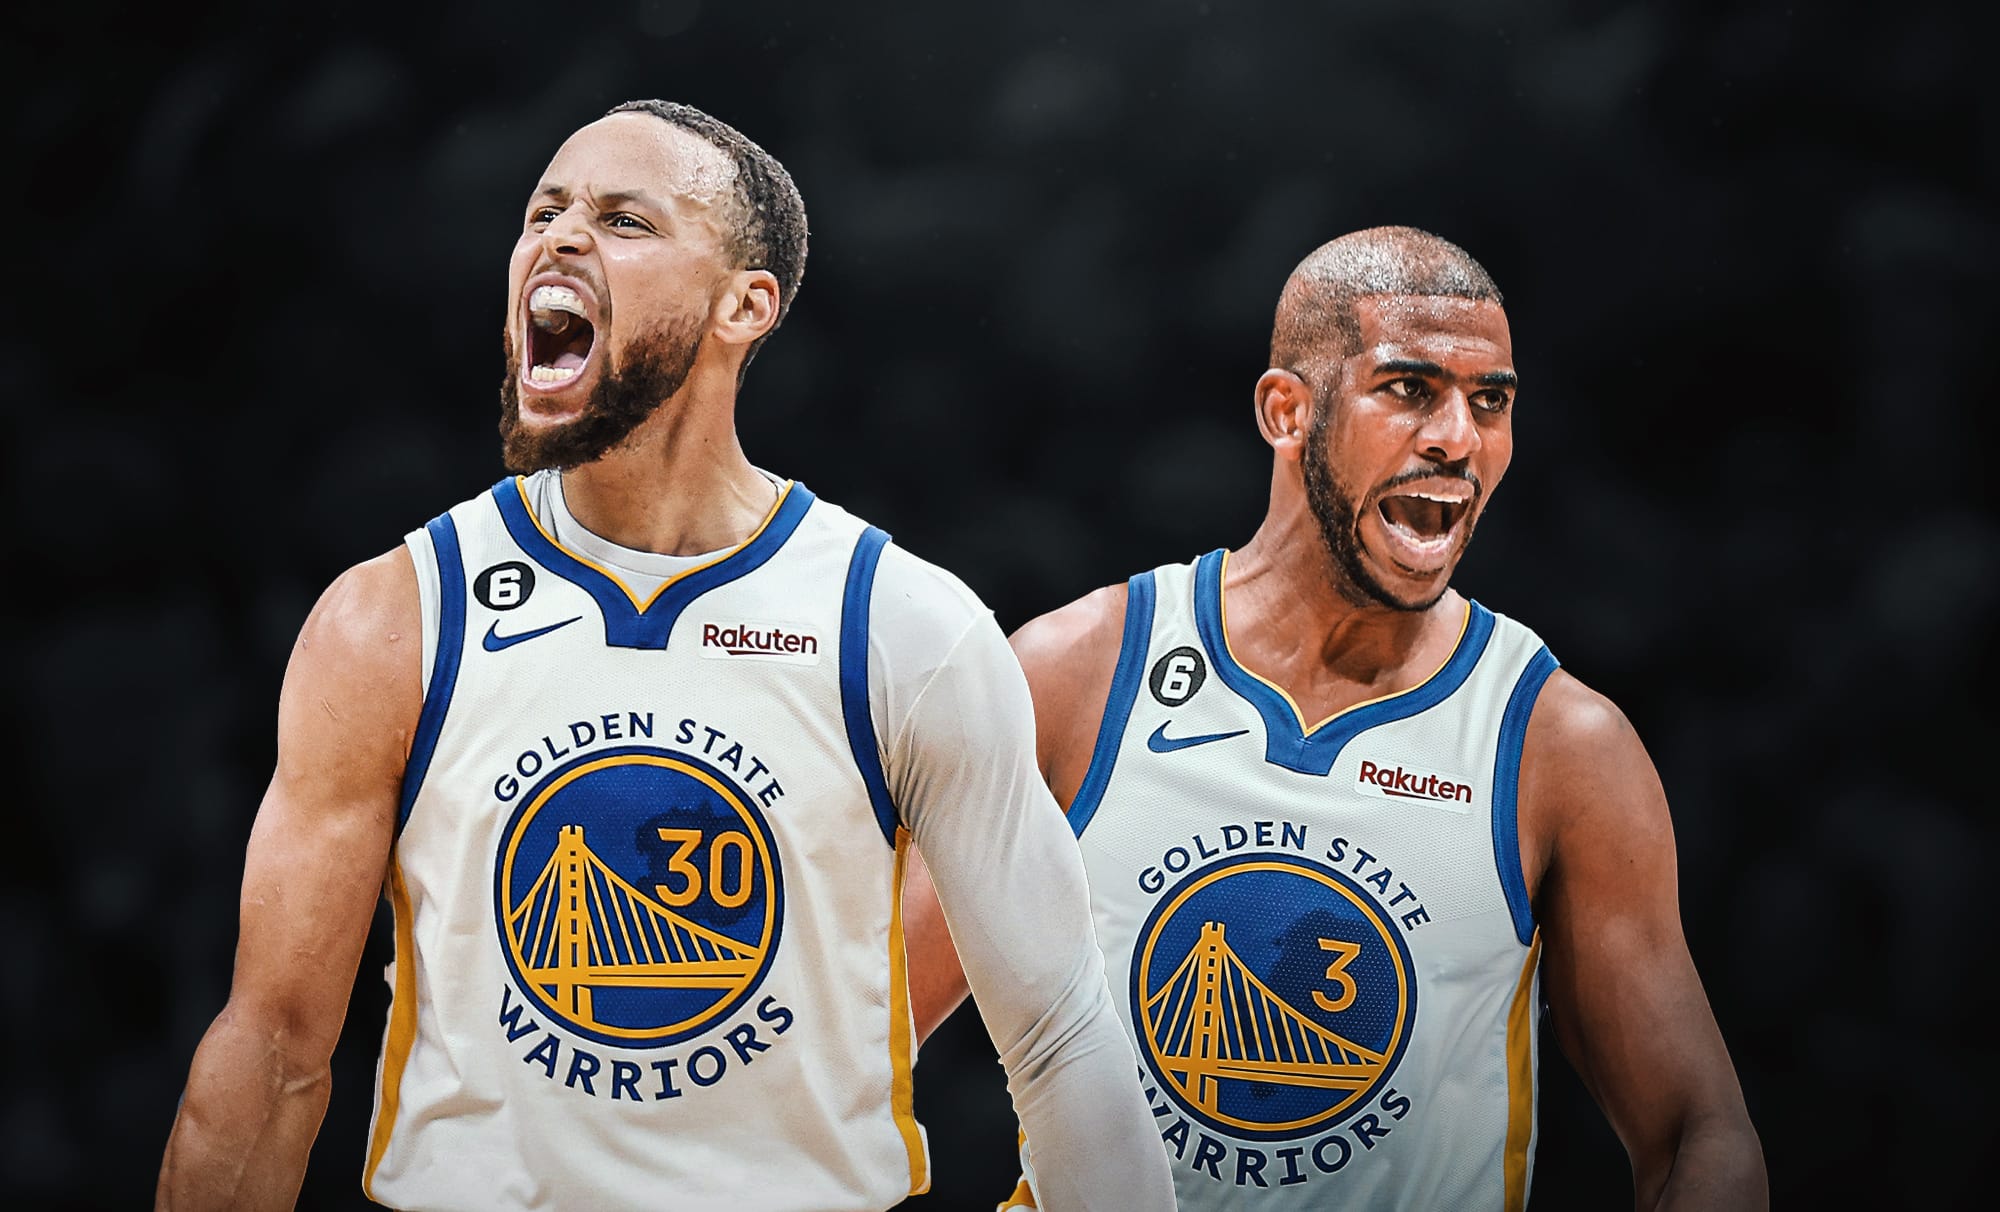 Chris Paul will have a big night for Golden State on Opening Night 2023